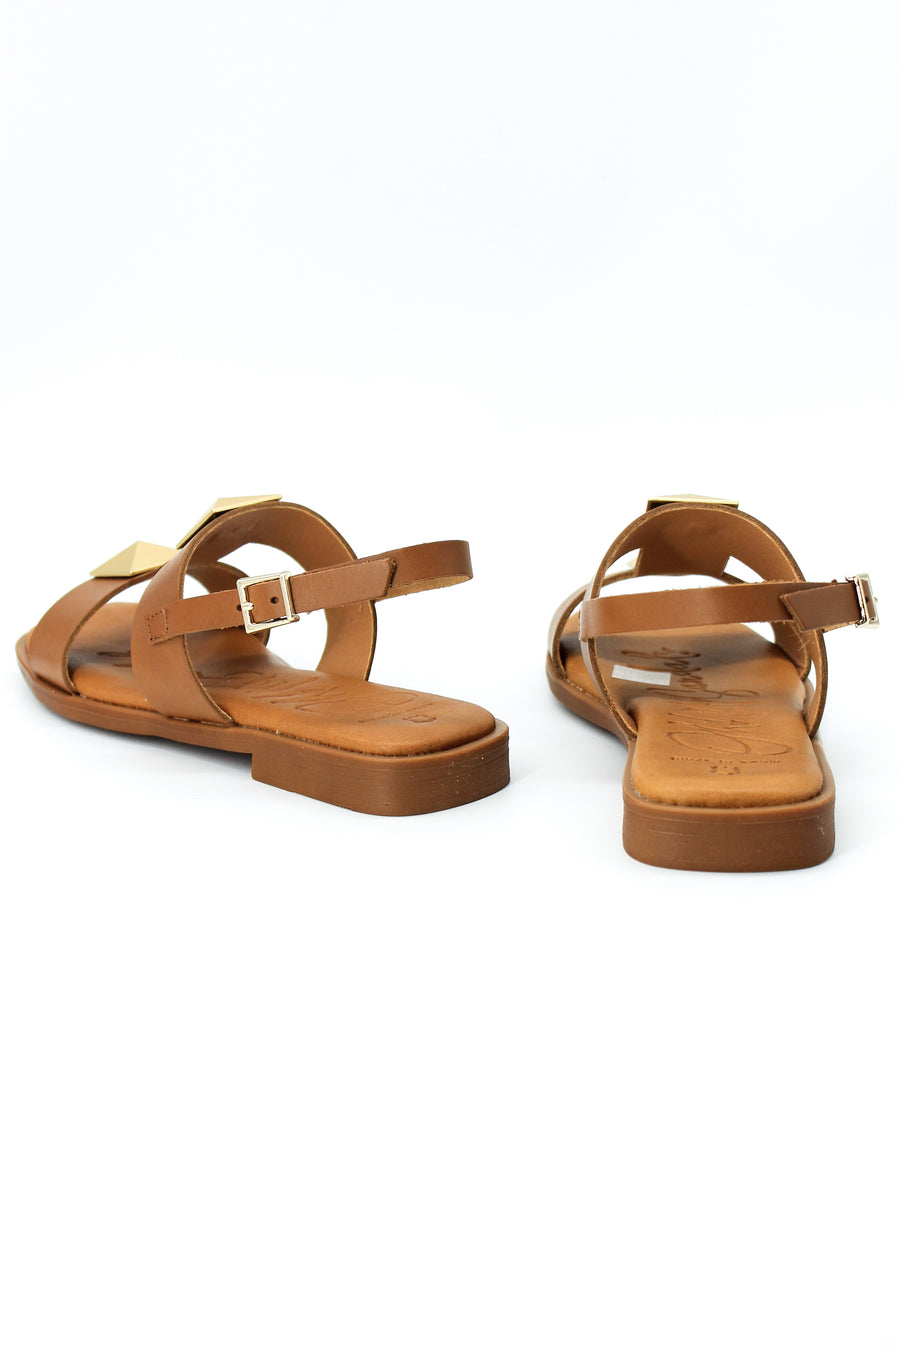 Oh My Sandals 5159 Tan